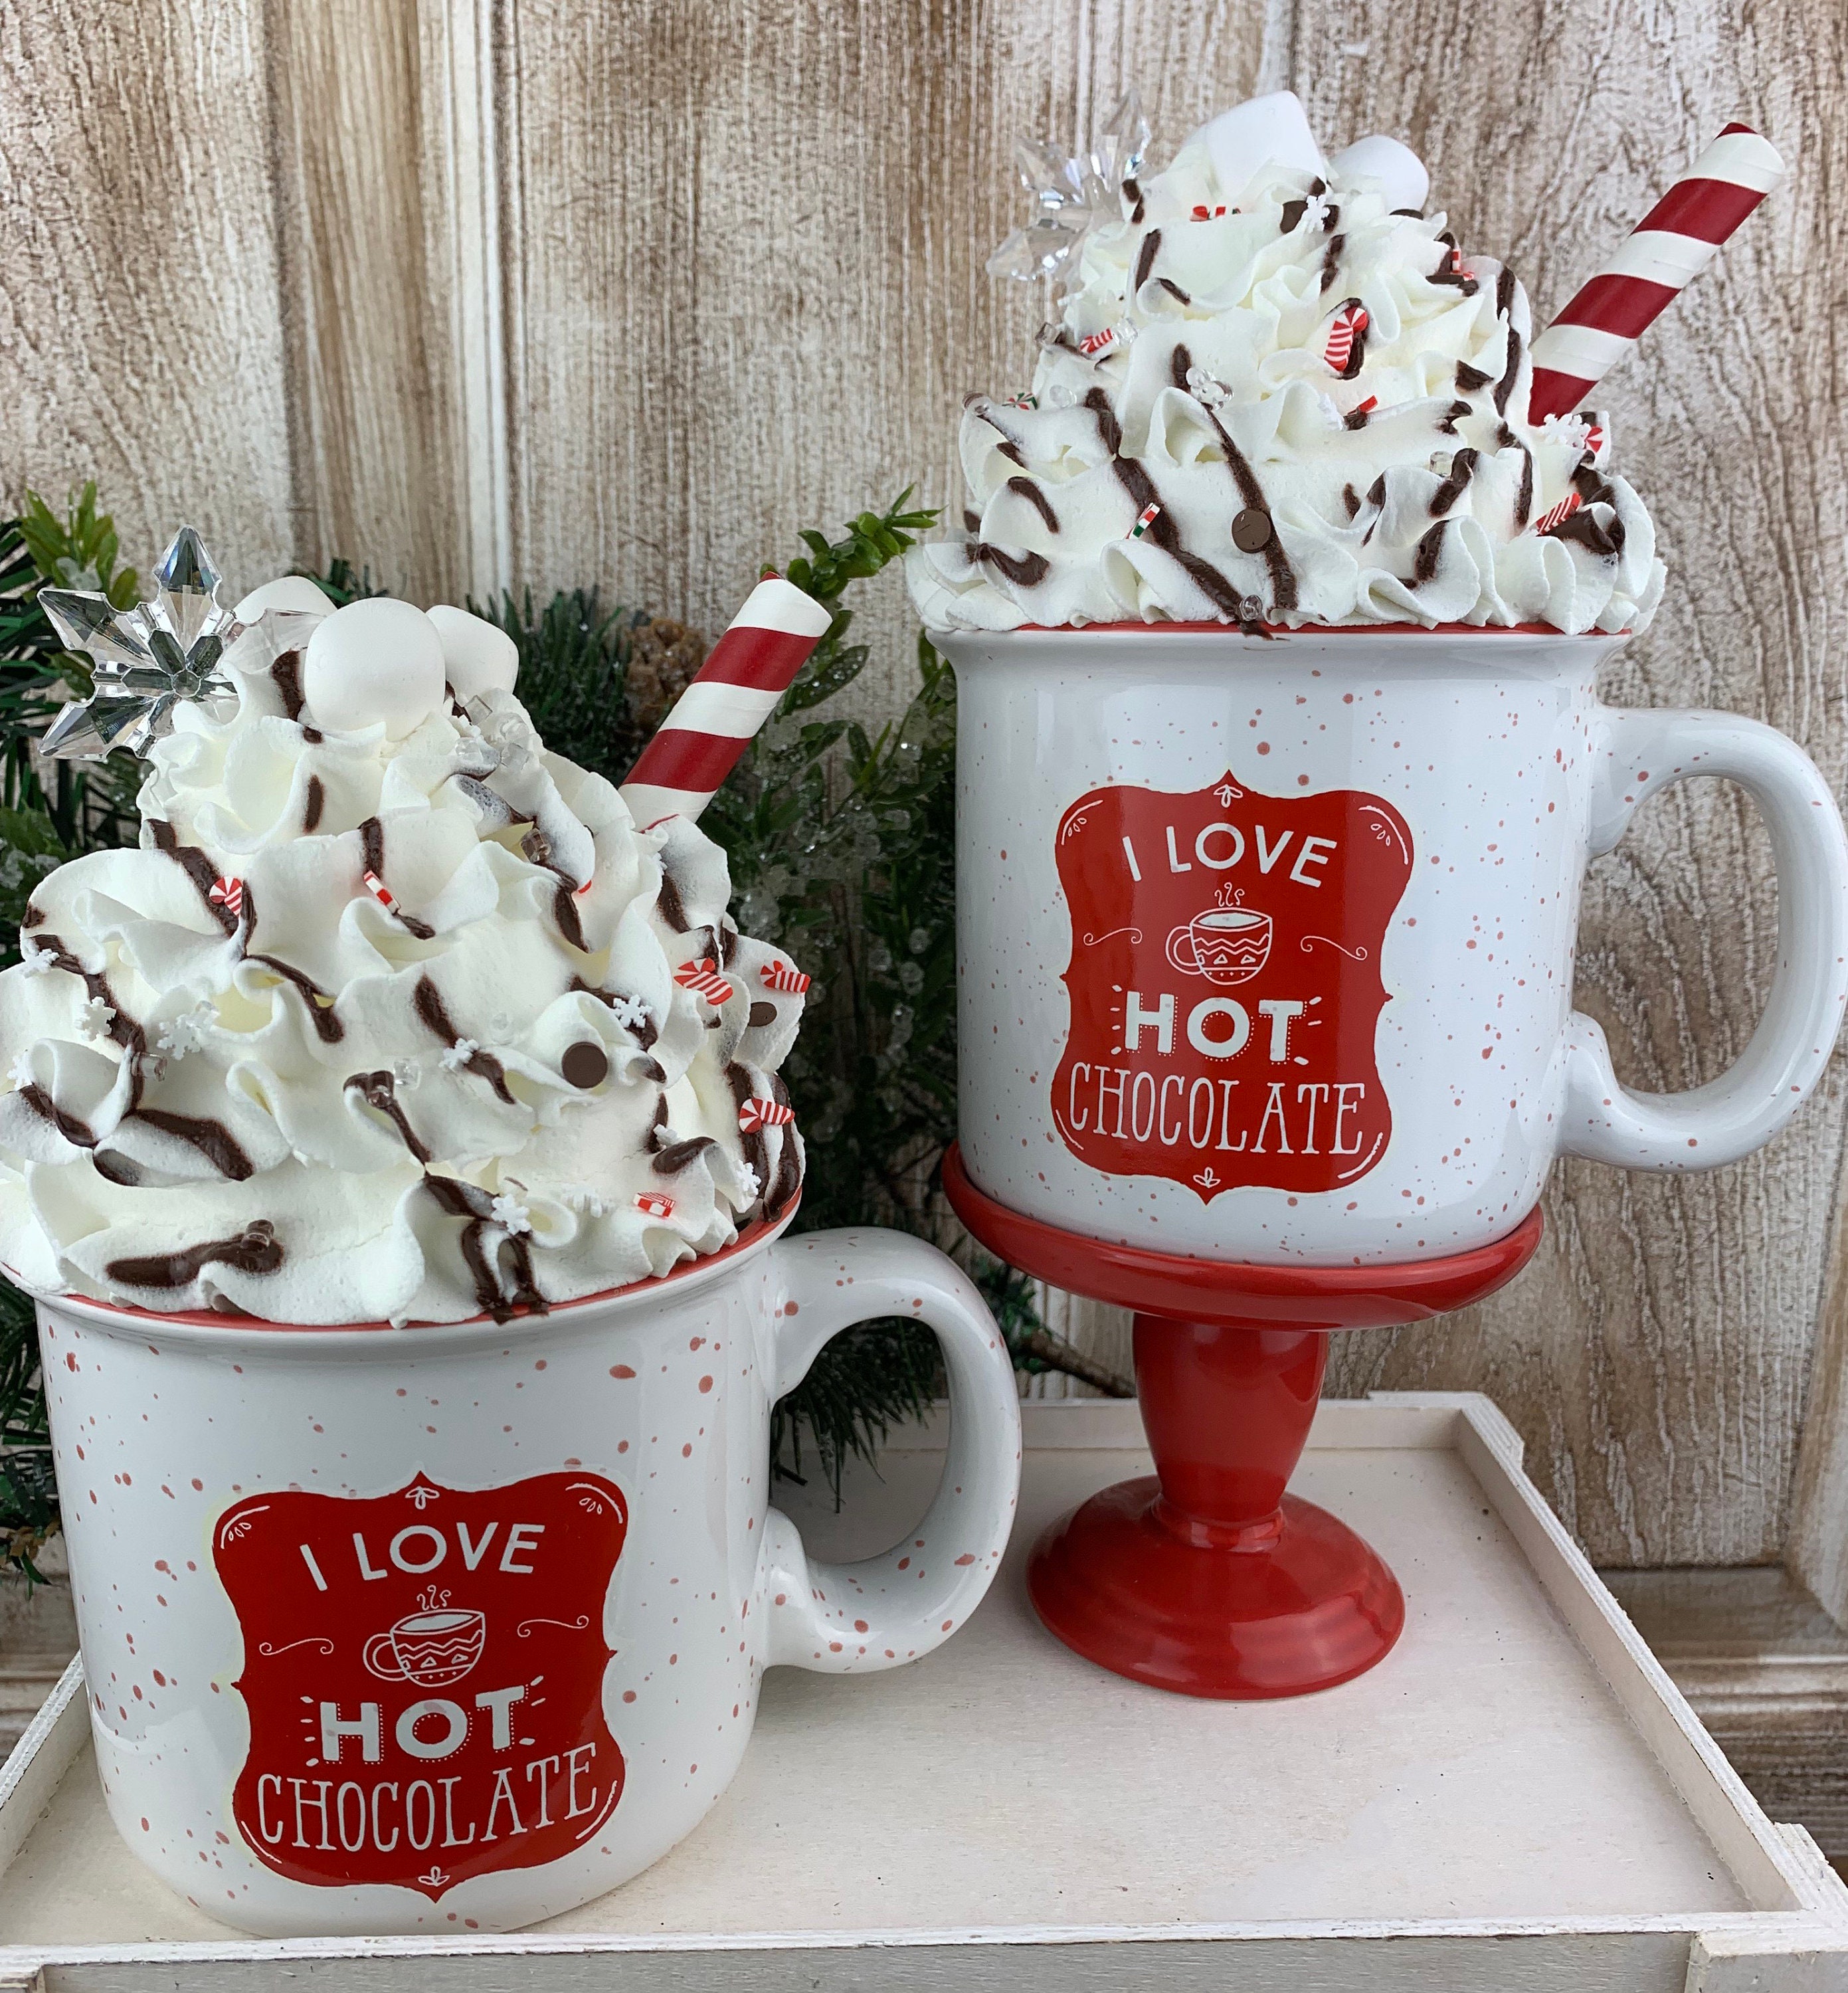 Marshmallow Hot Cocoa Toppers, 0.75 oz